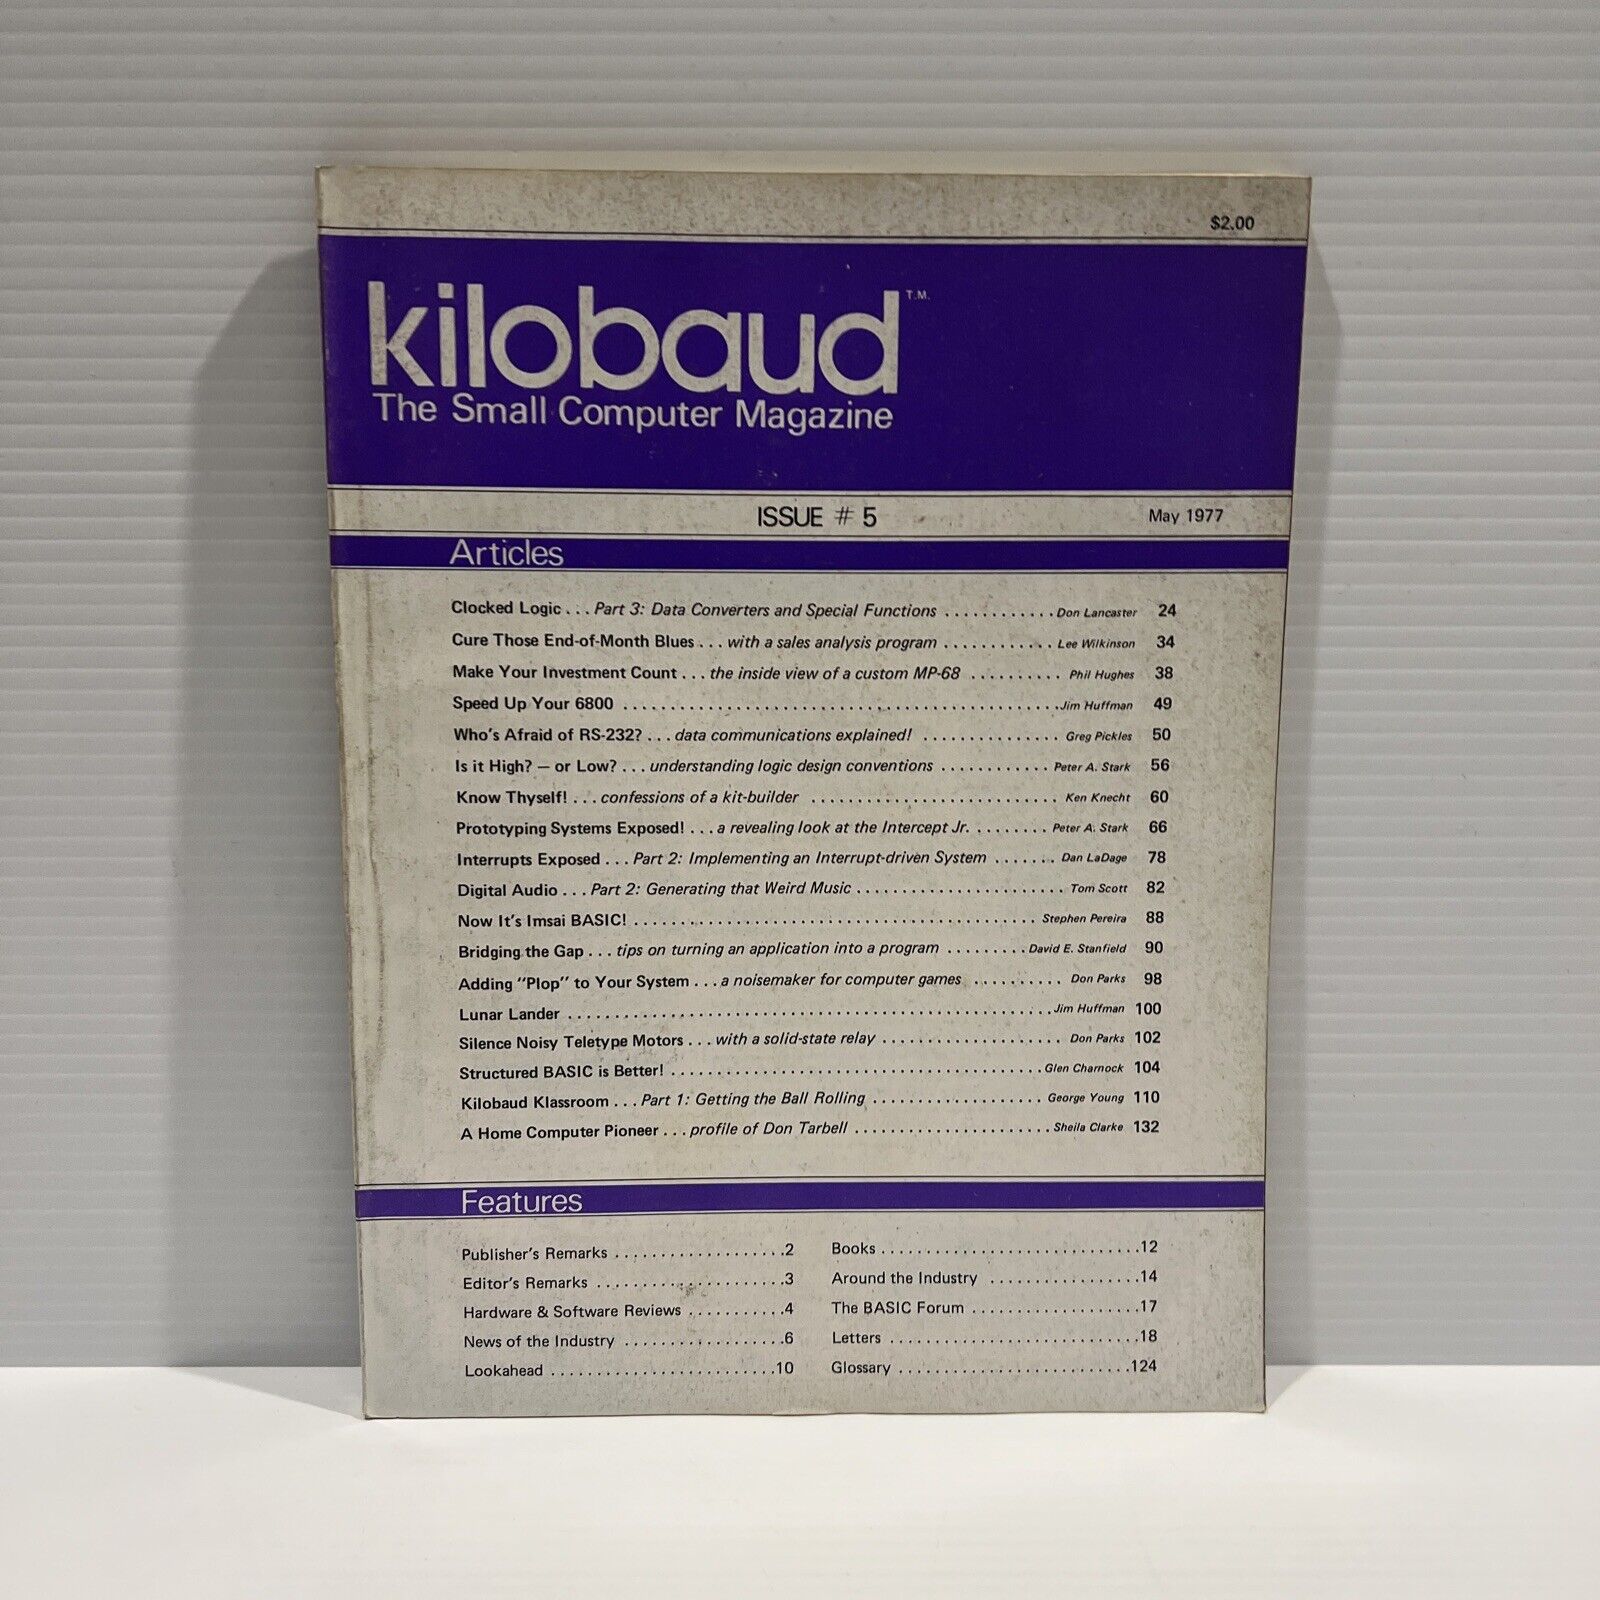 [1977] Kilobaud The Small Computer Magazine Issue 5 May 1977